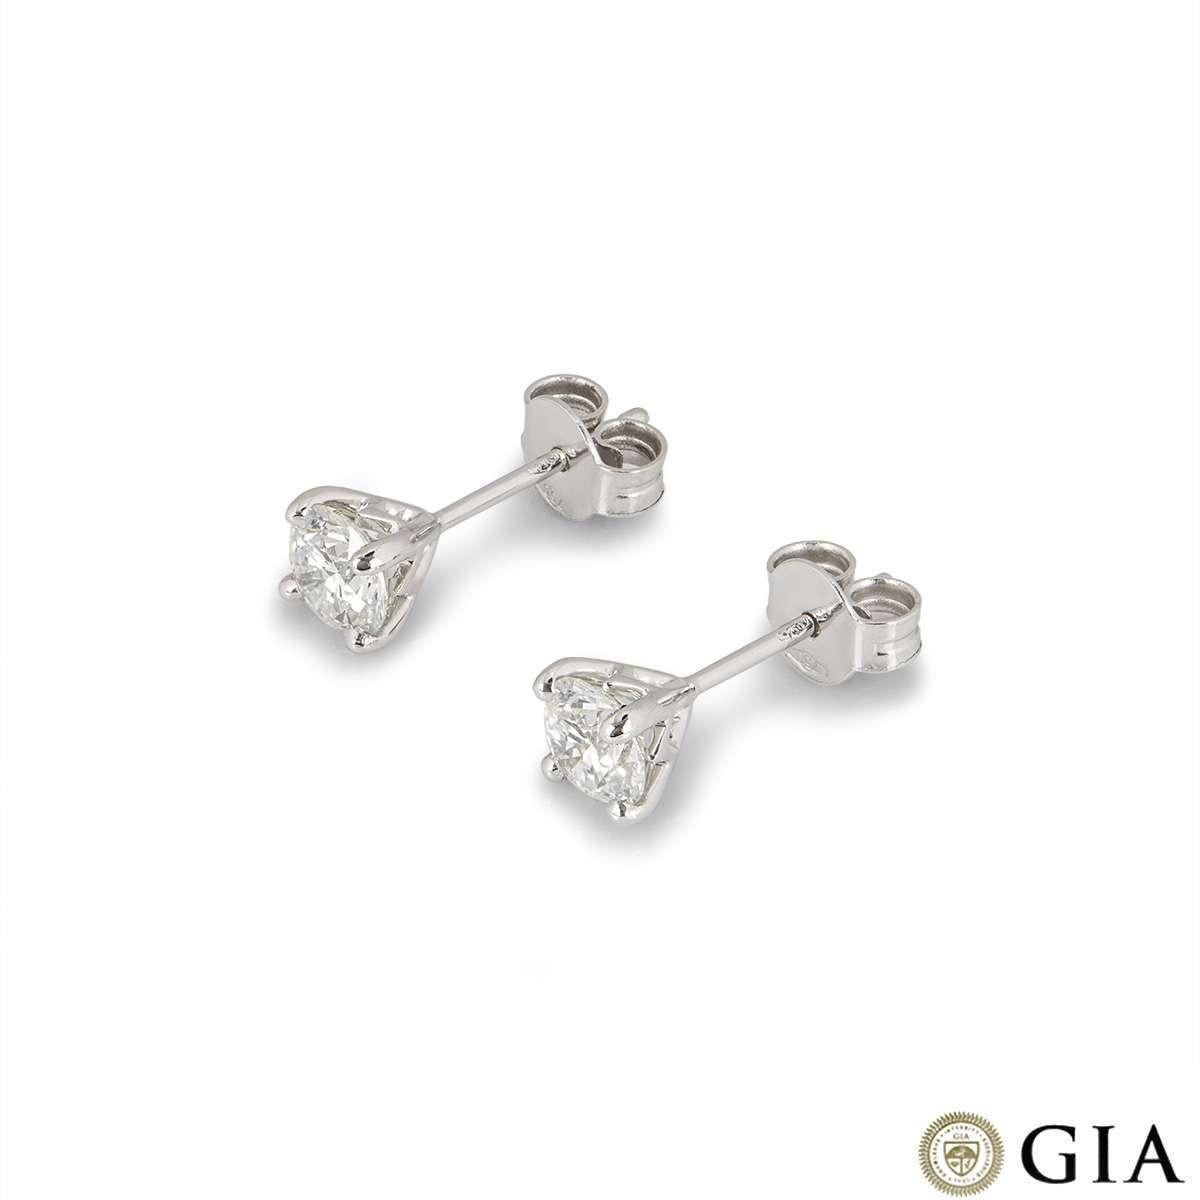 A pair of 18k white gold diamond stud earrings. The earrings feature round brilliant cut diamonds in a 4 claw setting. Both diamonds weigh 0.59ct each, H colour and VS1/VS2 clarity. Both diamonds score an excellent rating in all three aspects for